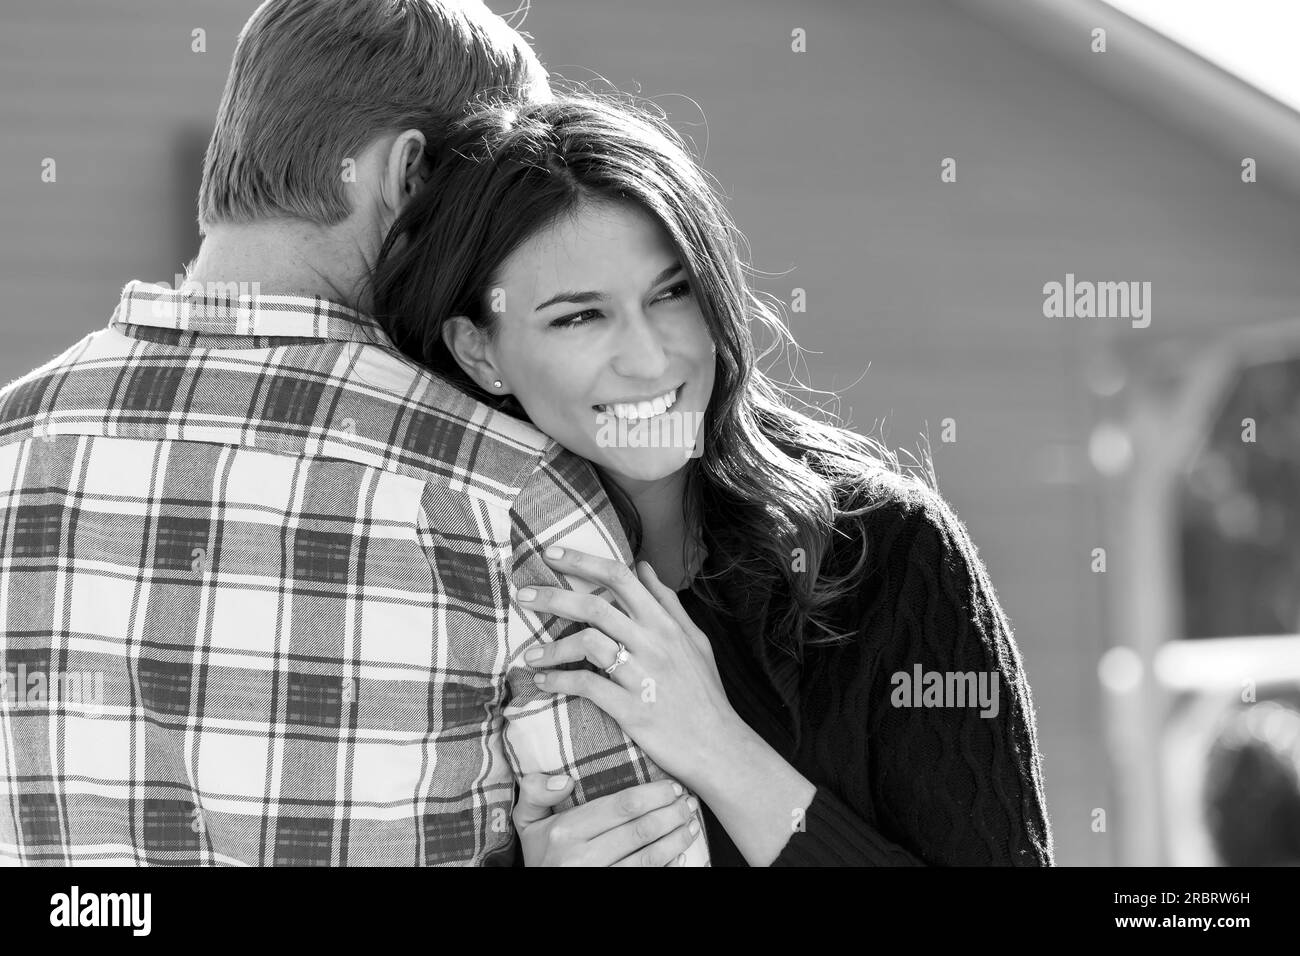 A young couple enjoy each other's company Stock Photo